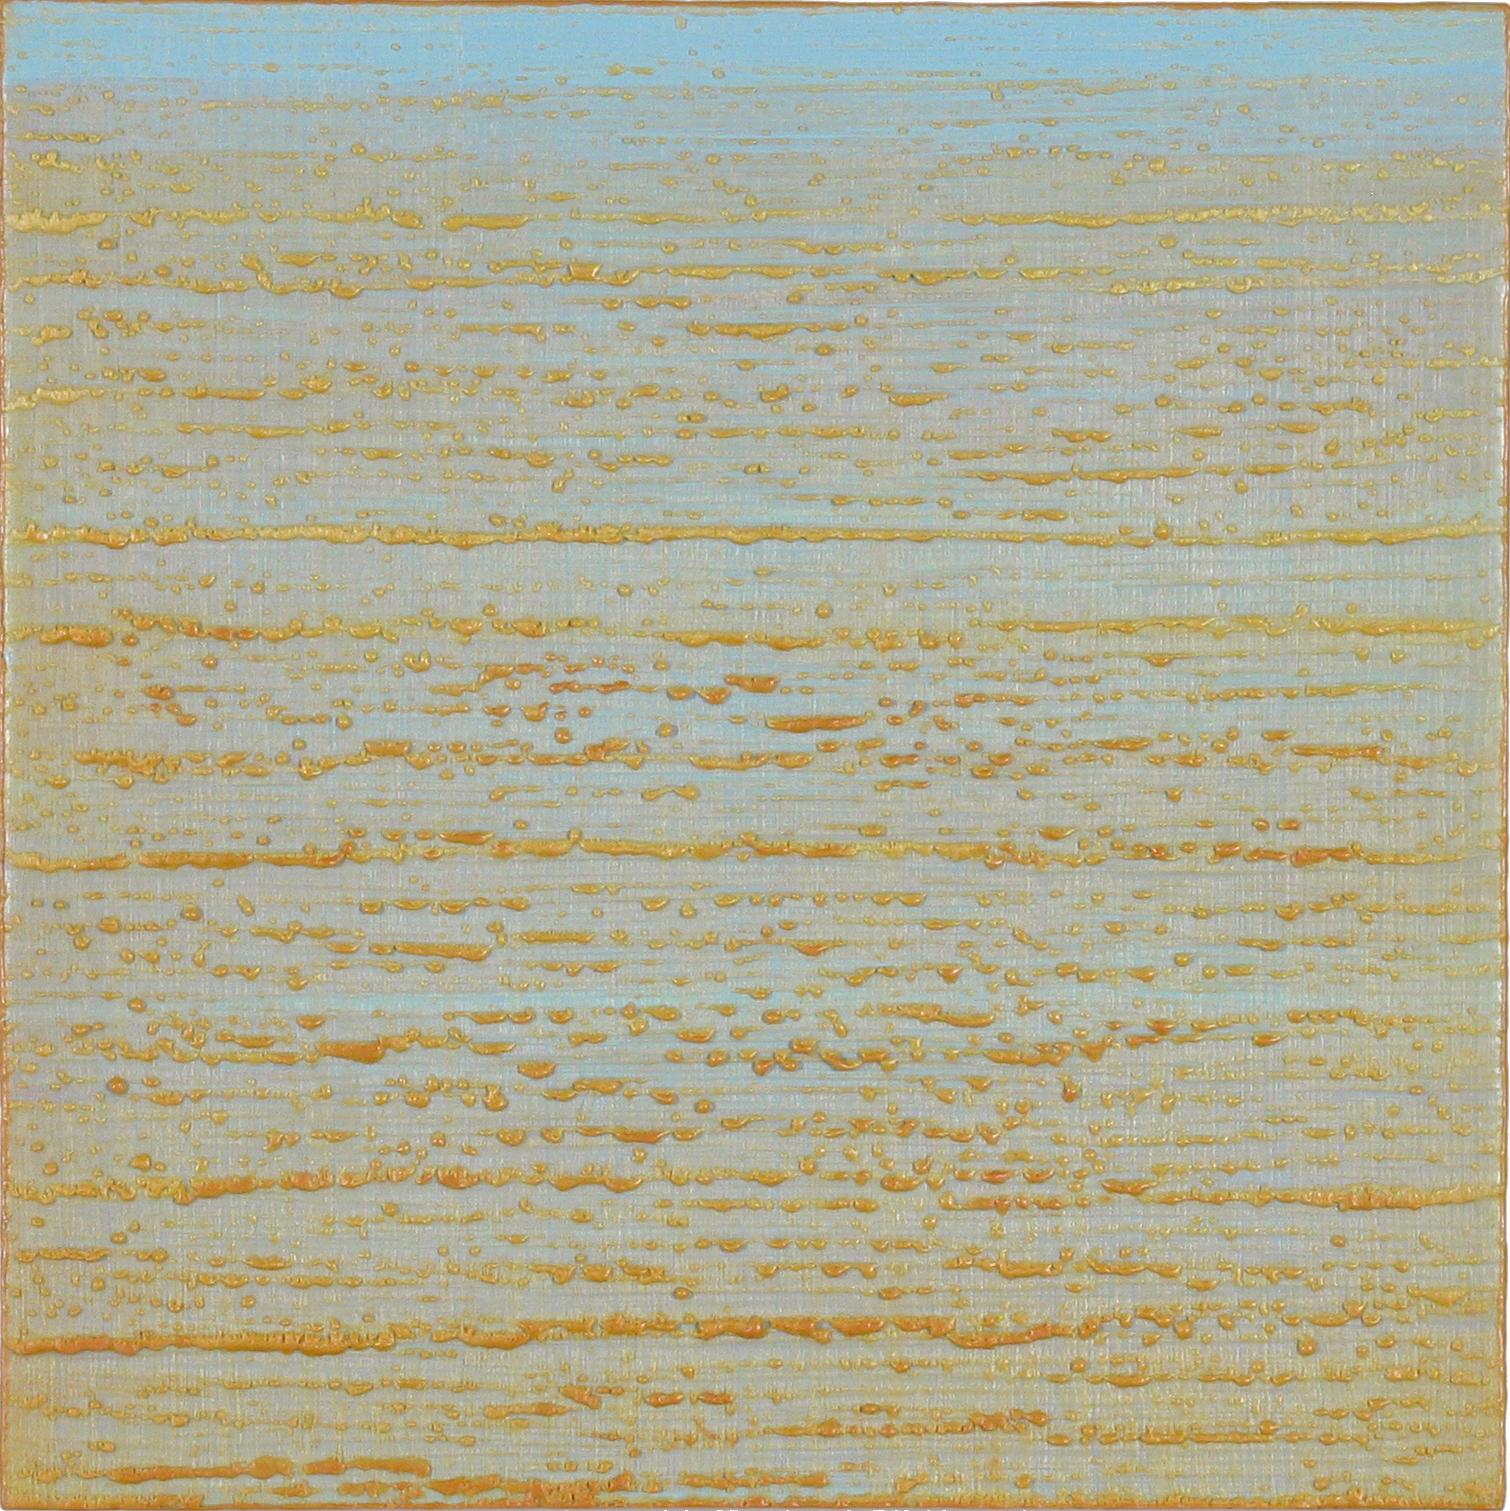 Light blue and pale golden yellow encaustic (pigmented beeswax) painting on birch panel accented with light orange highlights and pale peach edges. Signed, dated and titled on verso.

Joanne Mattera’s paintings can be described as lush minimalism,